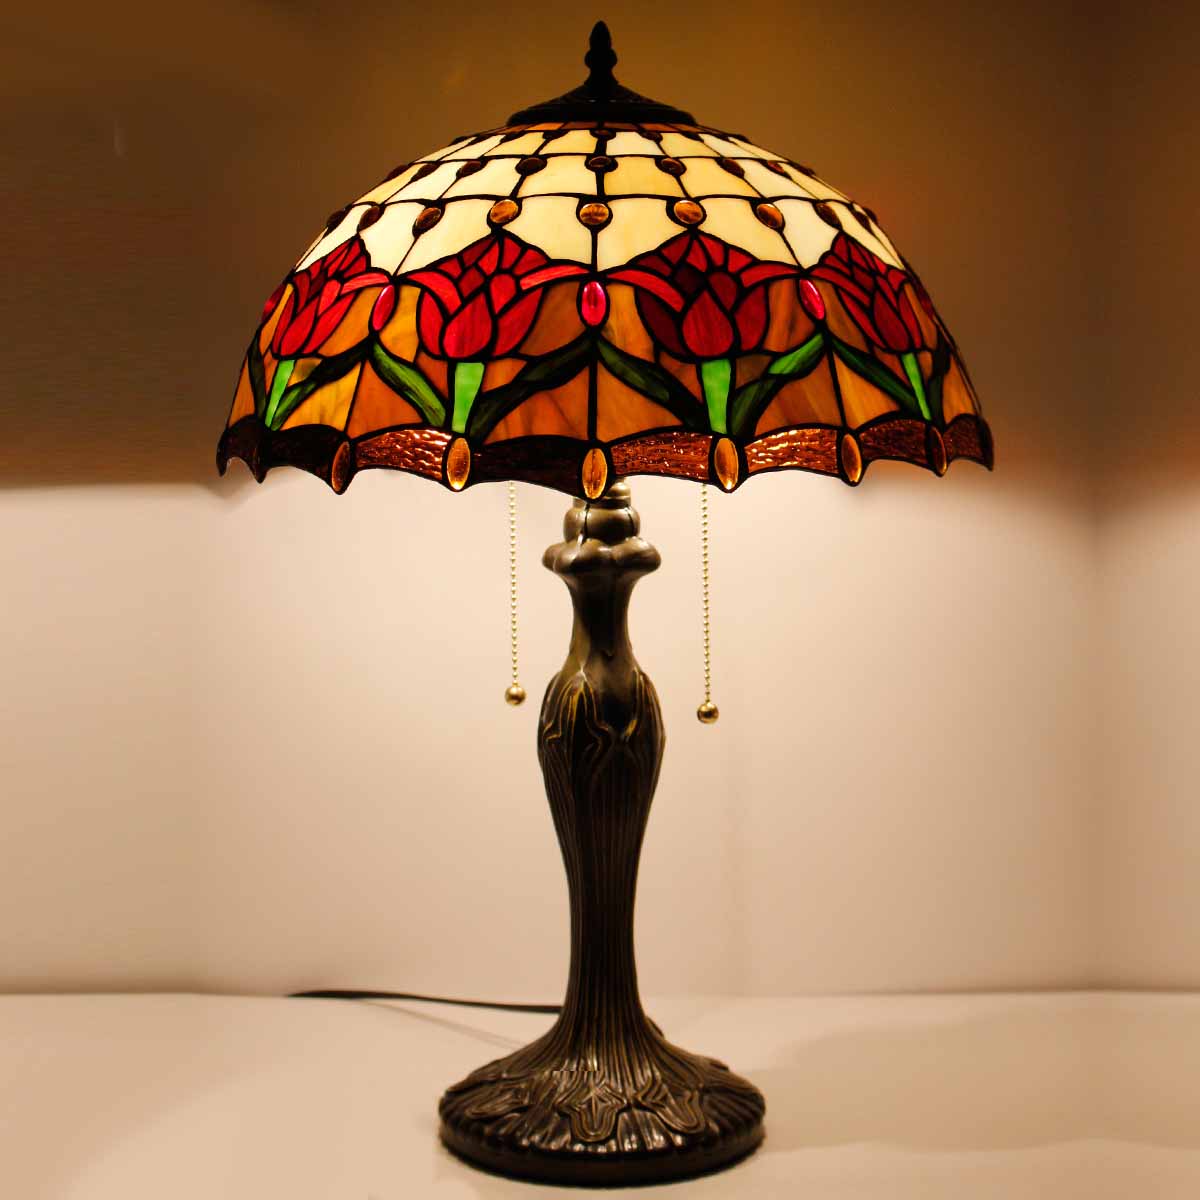 Tiffany Table Lamp Werfactory® Tulip Stained Glass Reading Desk Light